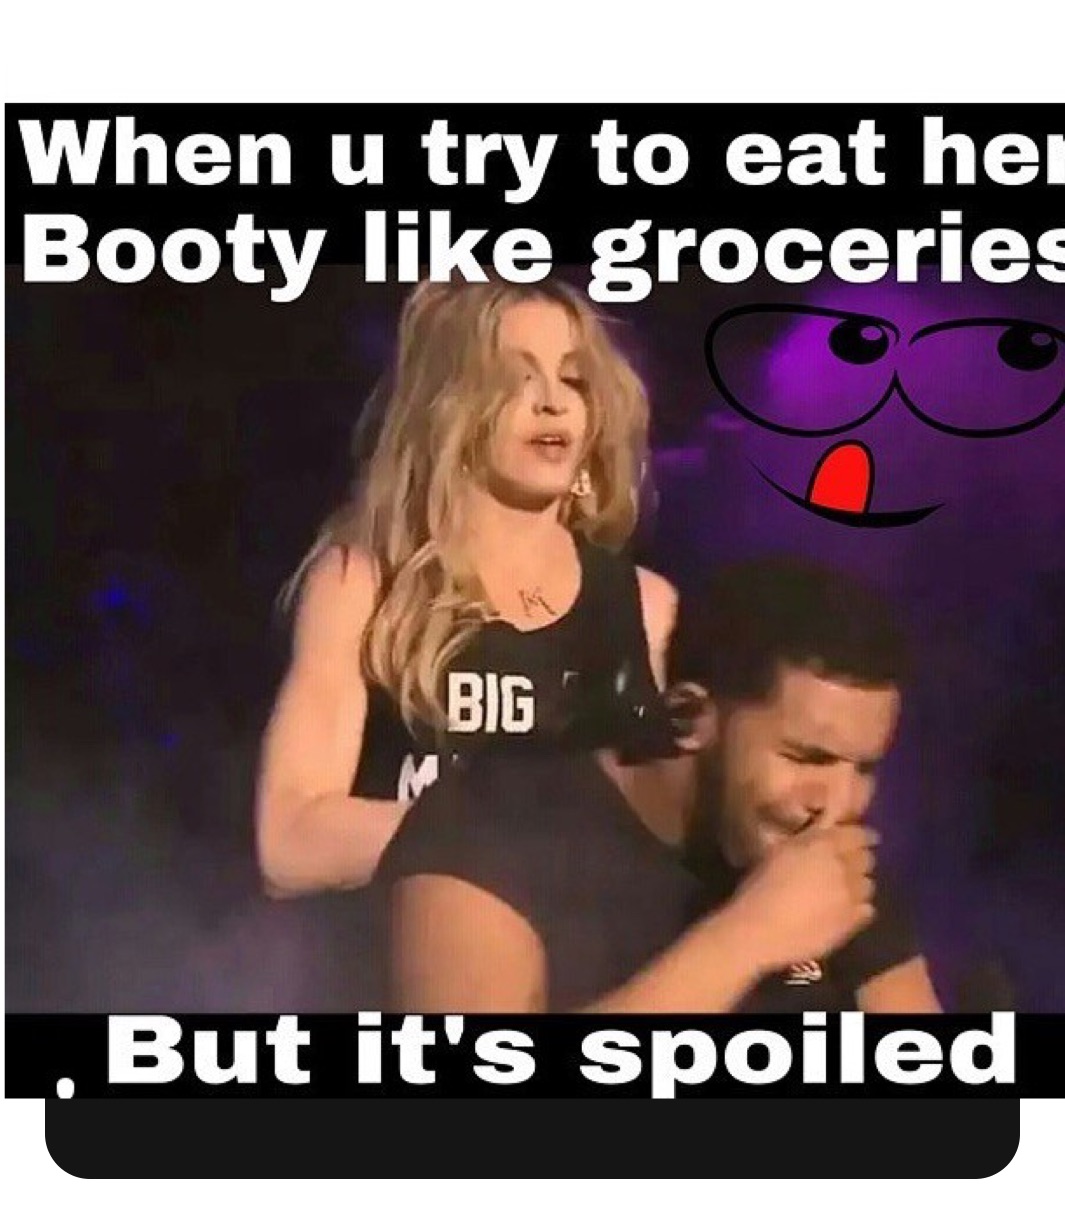 Eat that booty like groceries song